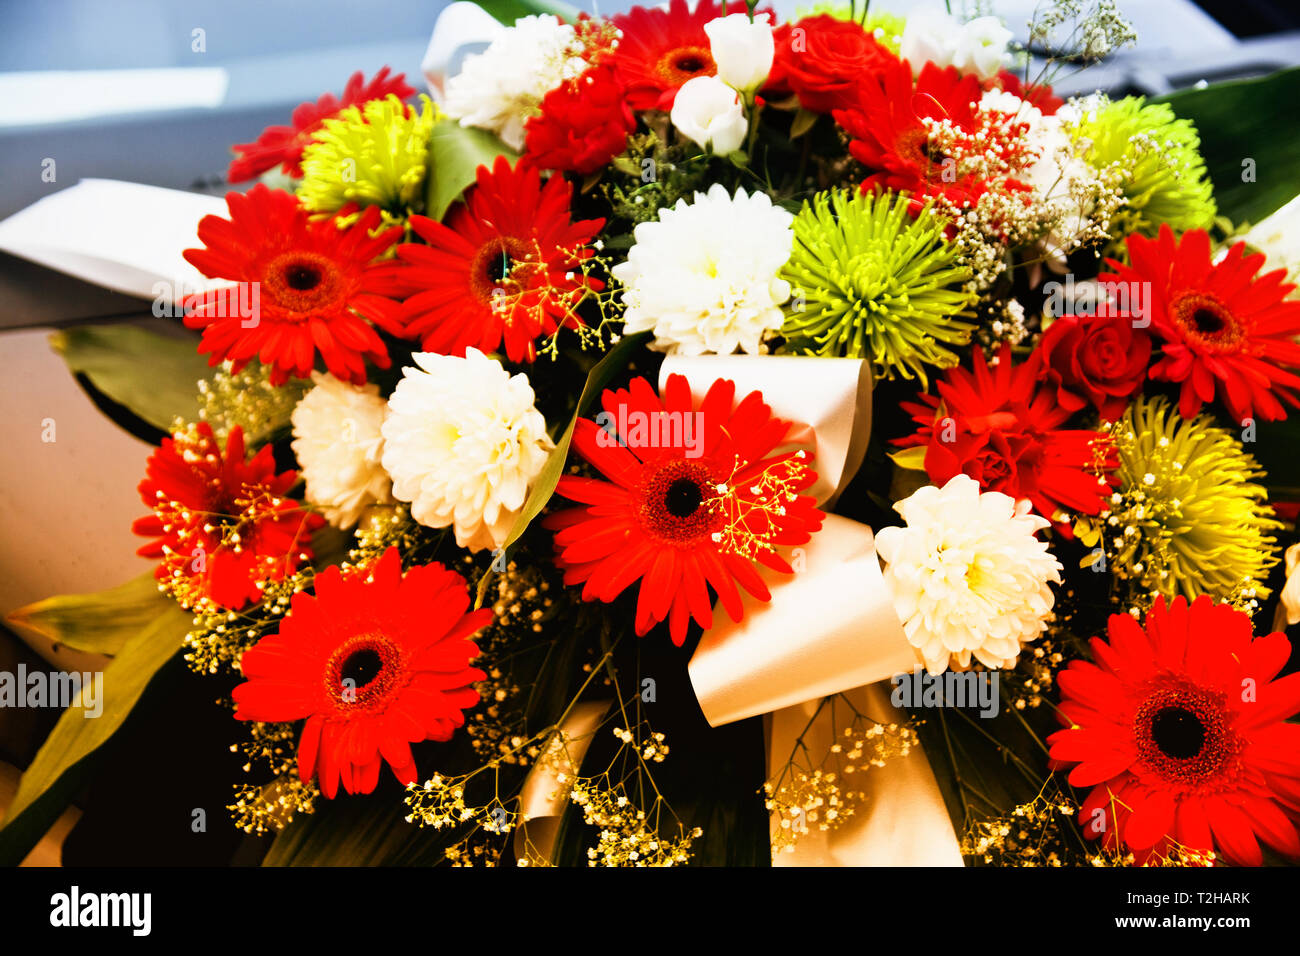 A flower bouquet for the wedding on the hood of a car. Stock Photo